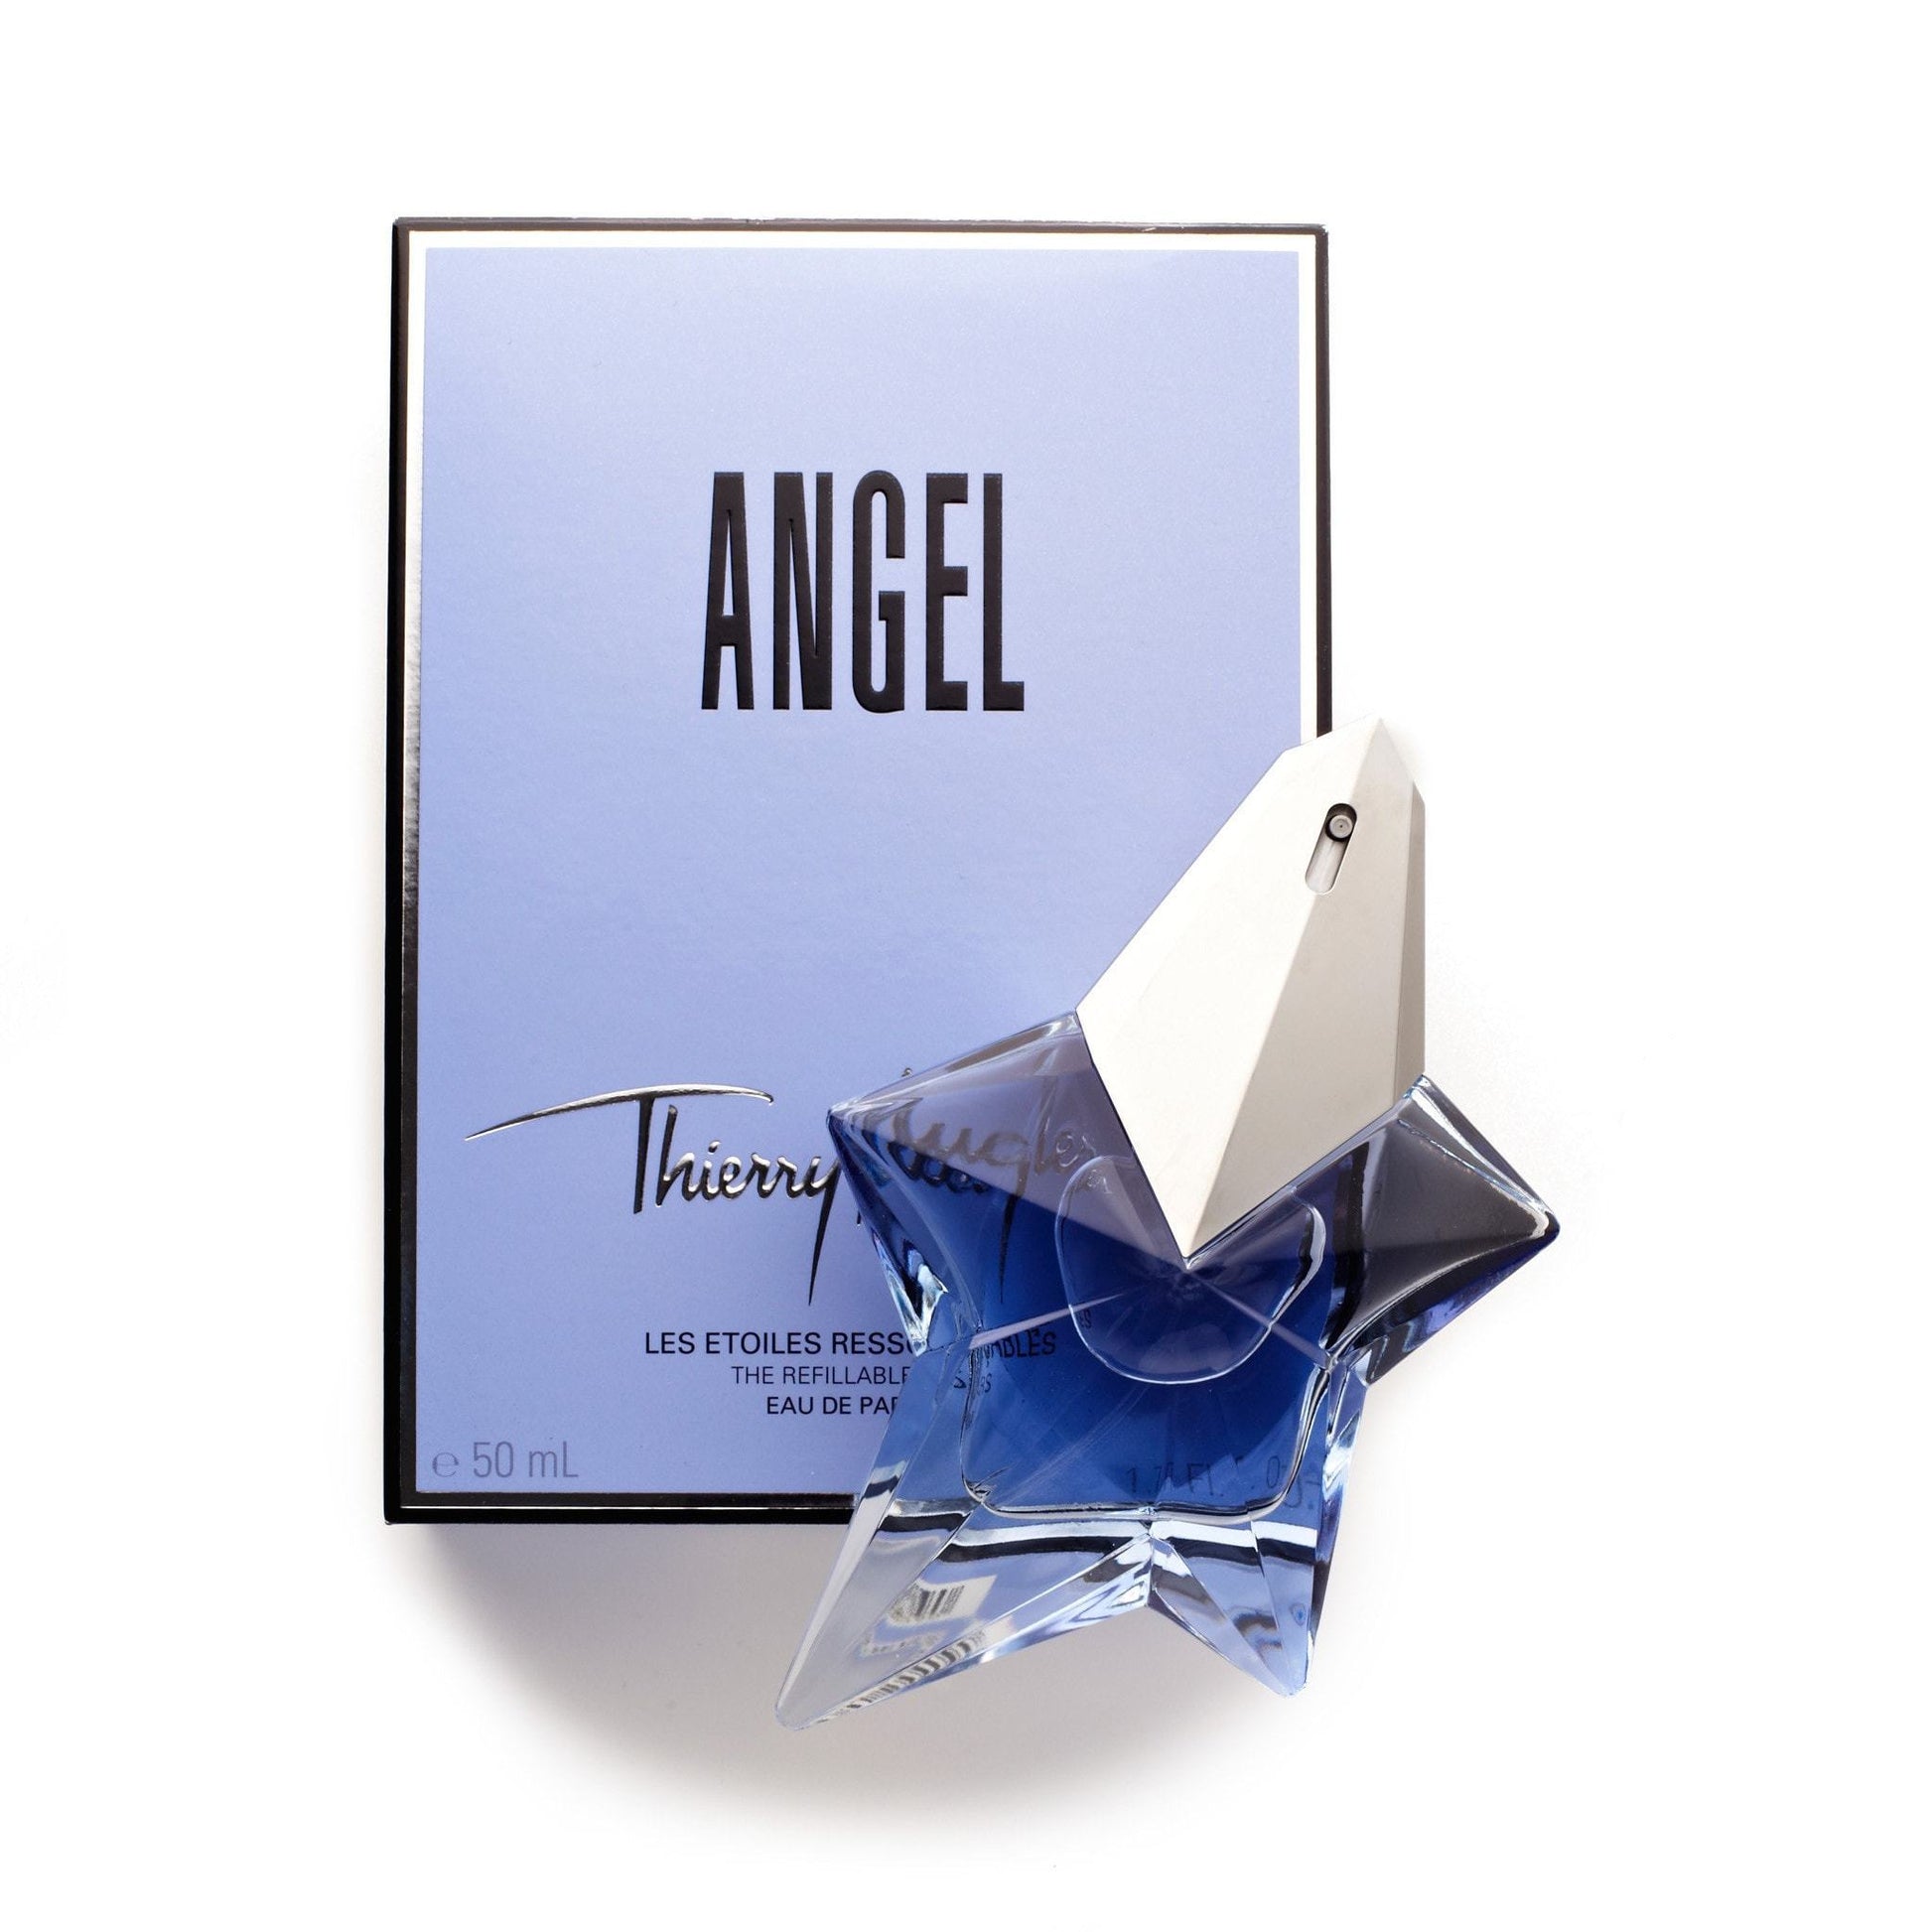 Angel Refillable Eau de Parfum Spray for Women by Thierry Mugler, Product image 8